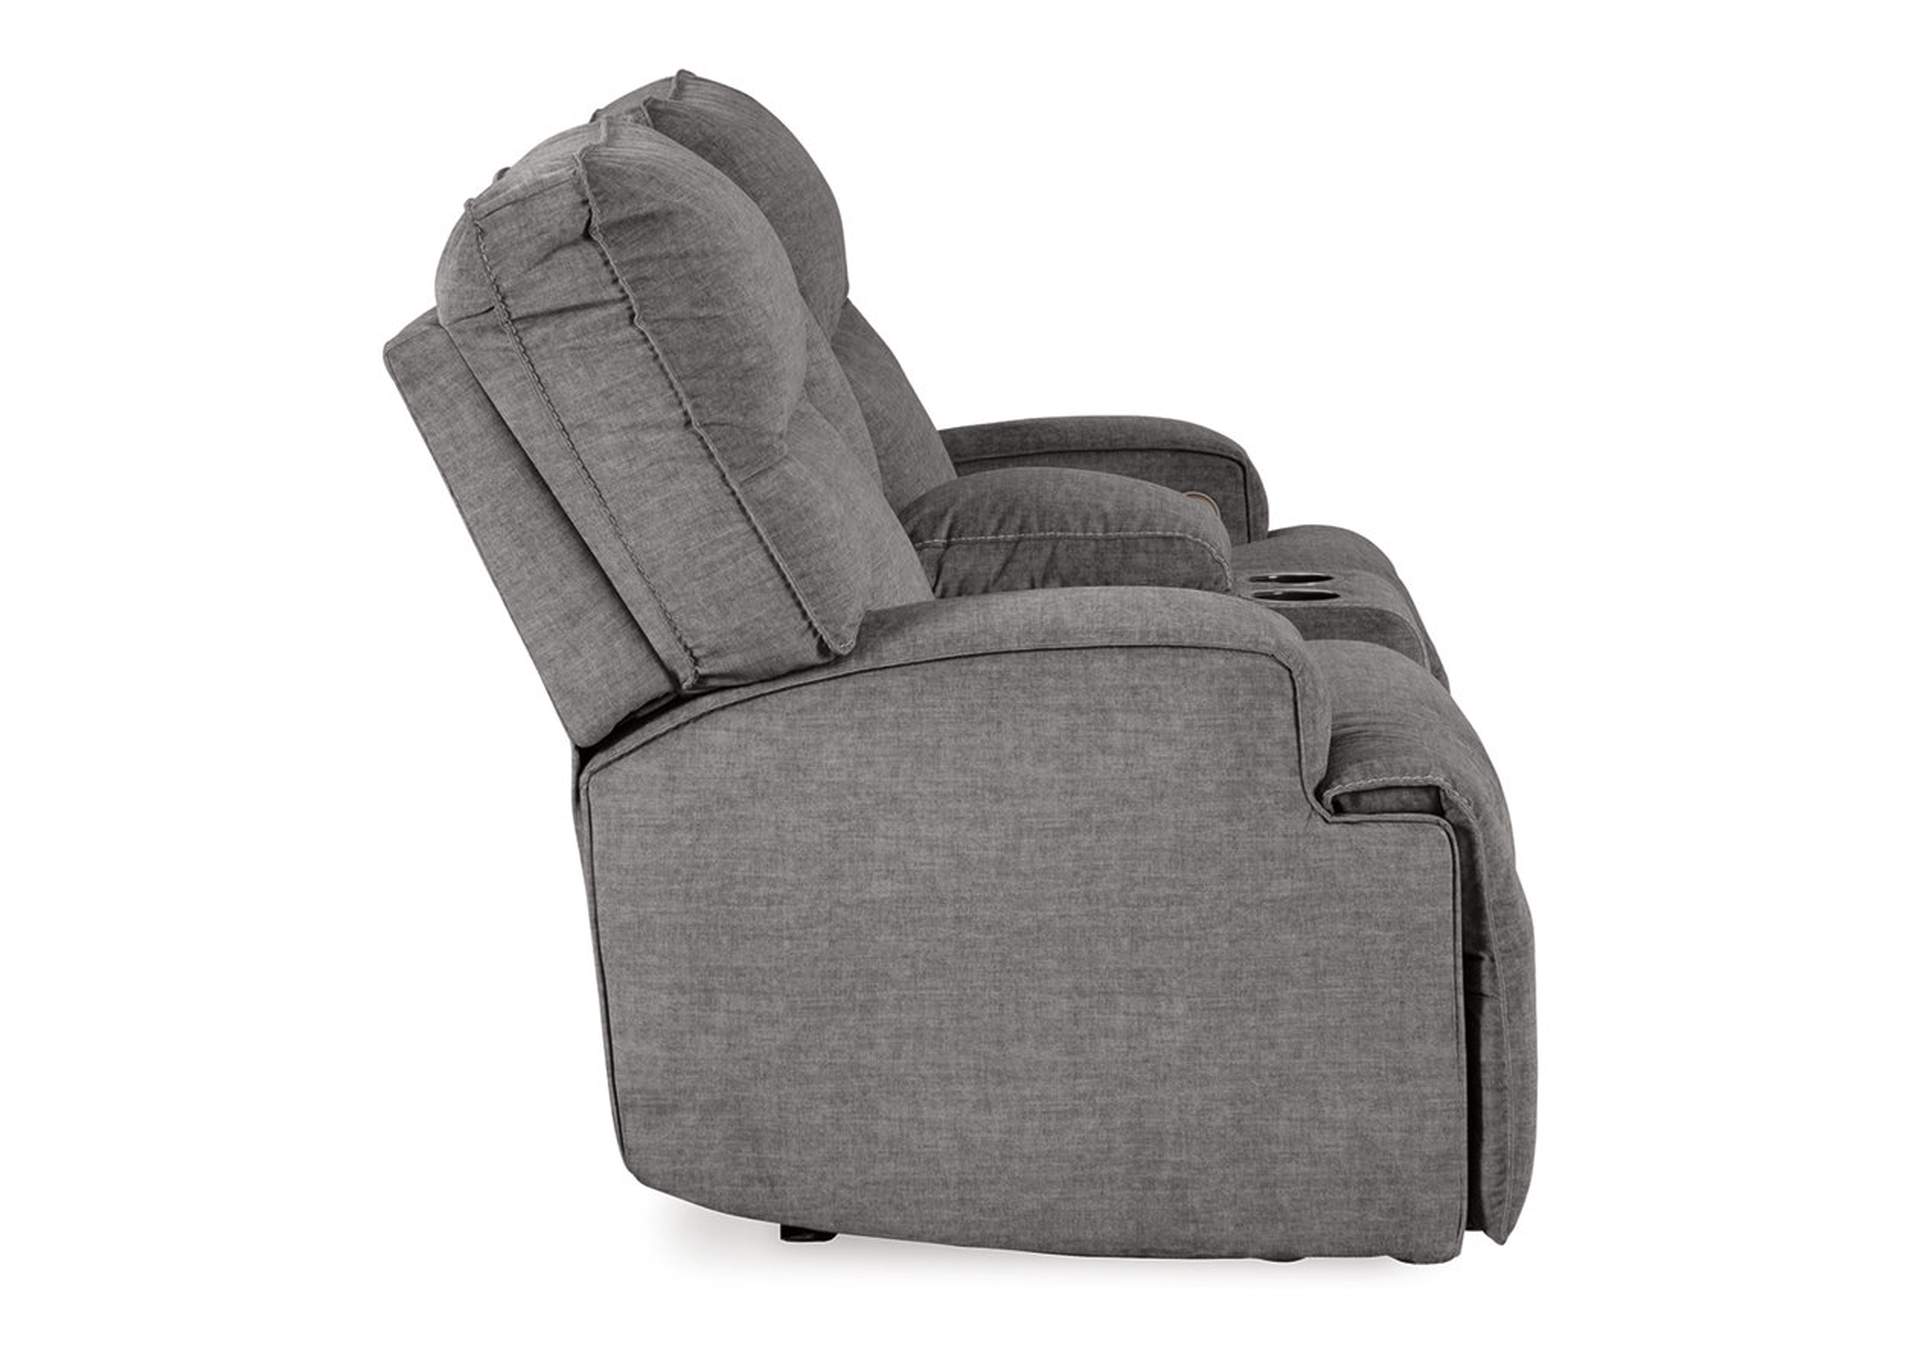 Coombs Power Reclining Loveseat with Console,Signature Design By Ashley